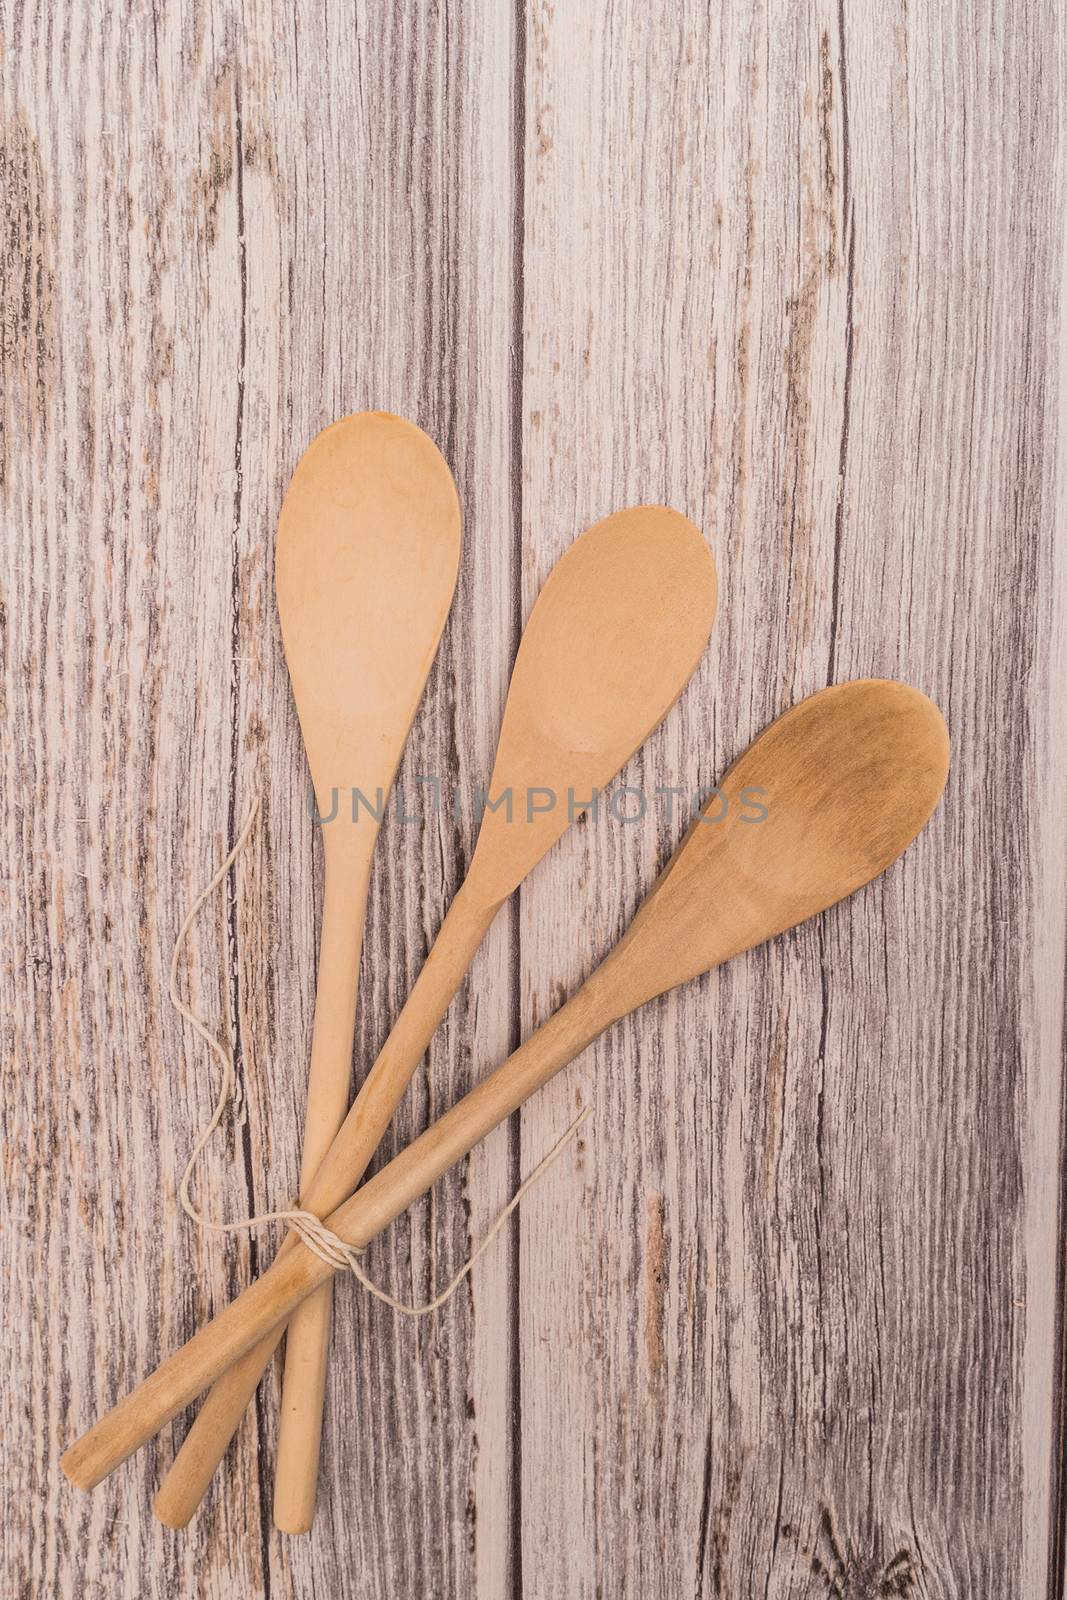 Wooden spoon tied up with a ribbon on rustic background by AnaMarques